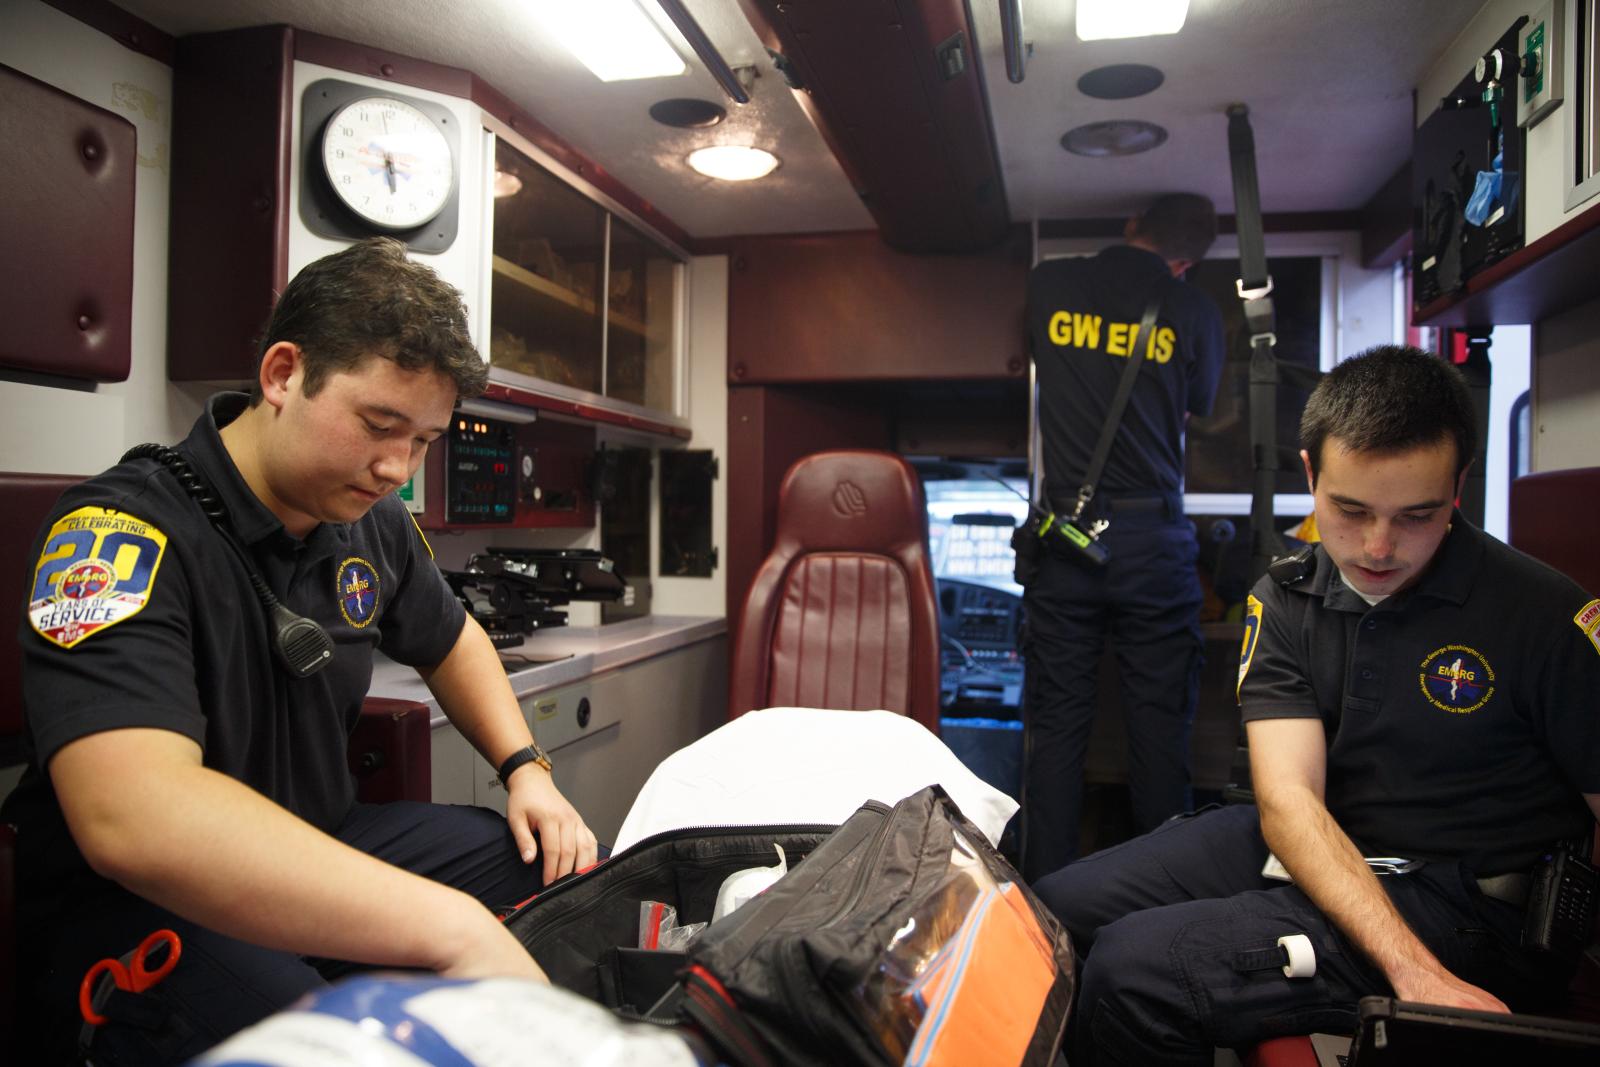 students scan interior of ambulance to check supplies